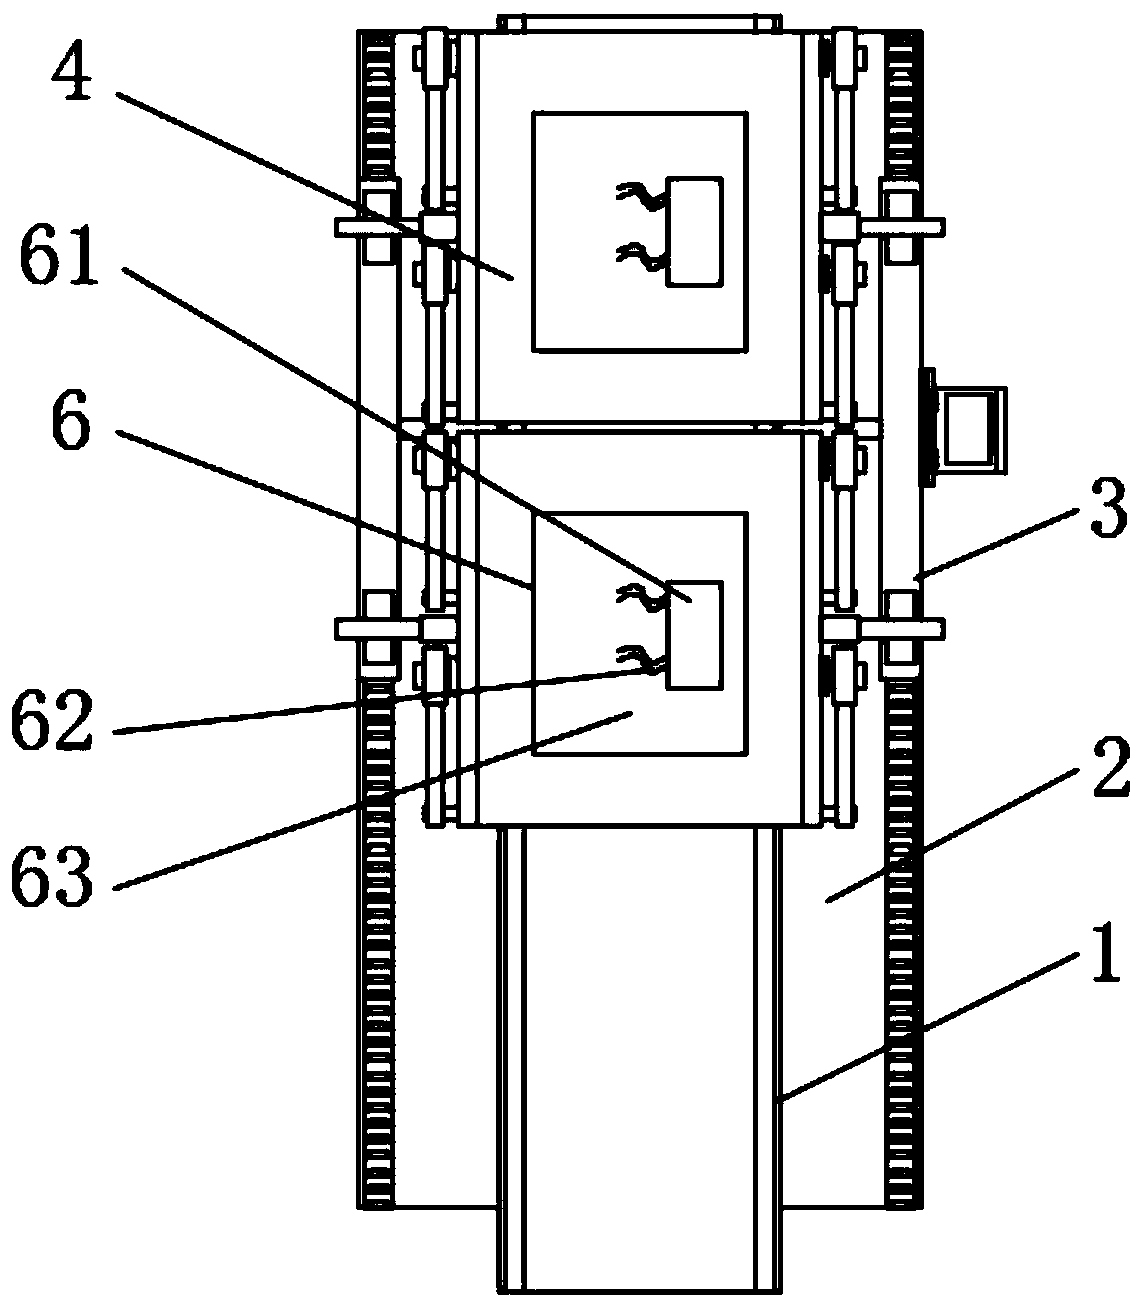 Positioning device for welding semiconductor parts